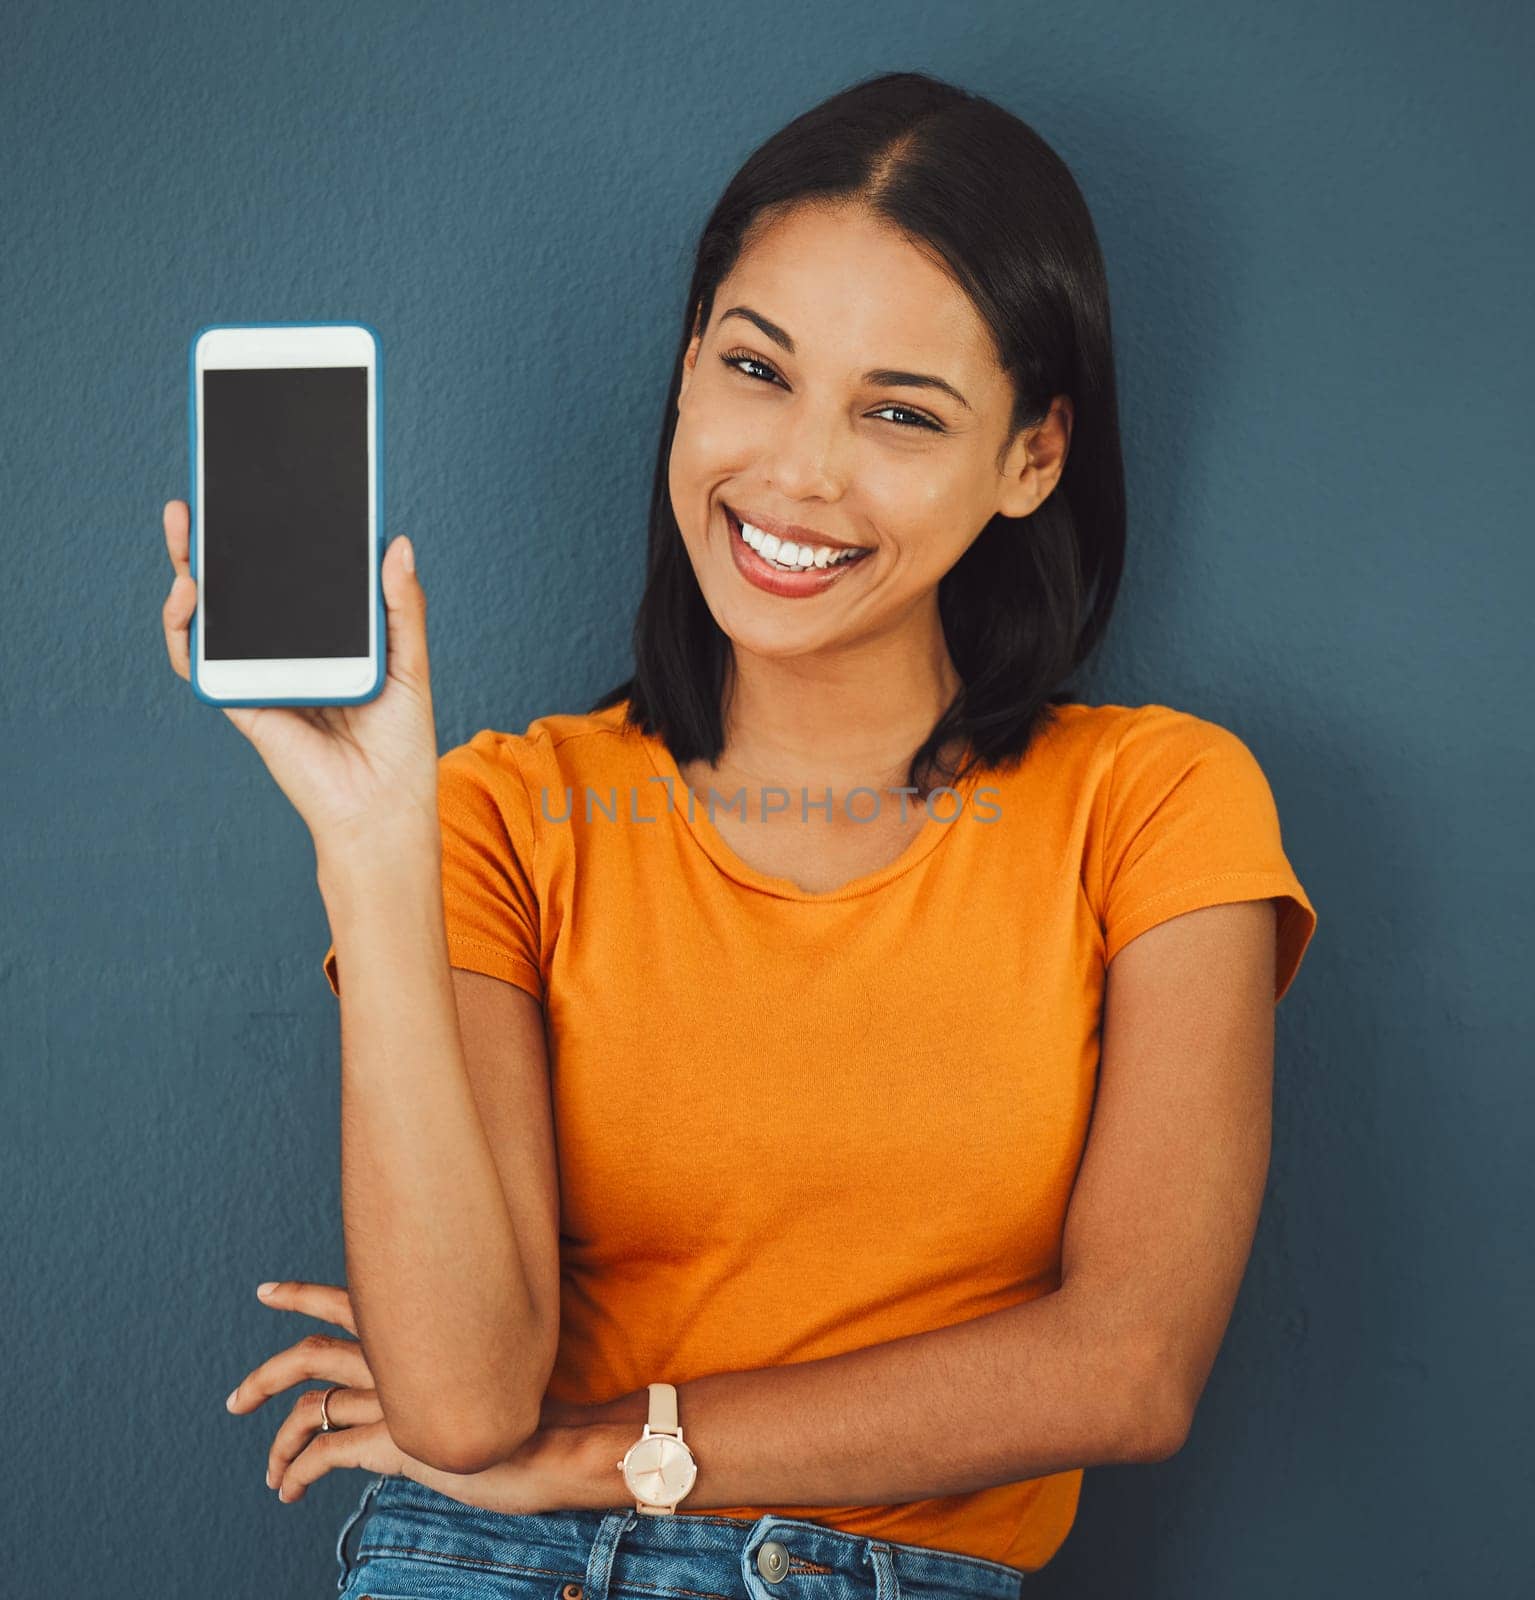 Woman, happy portrait and phone screen mockup for advertising website, network or contact on internet. Face of person with smartphone for ux promotion, about us and display on web for brand or logo.